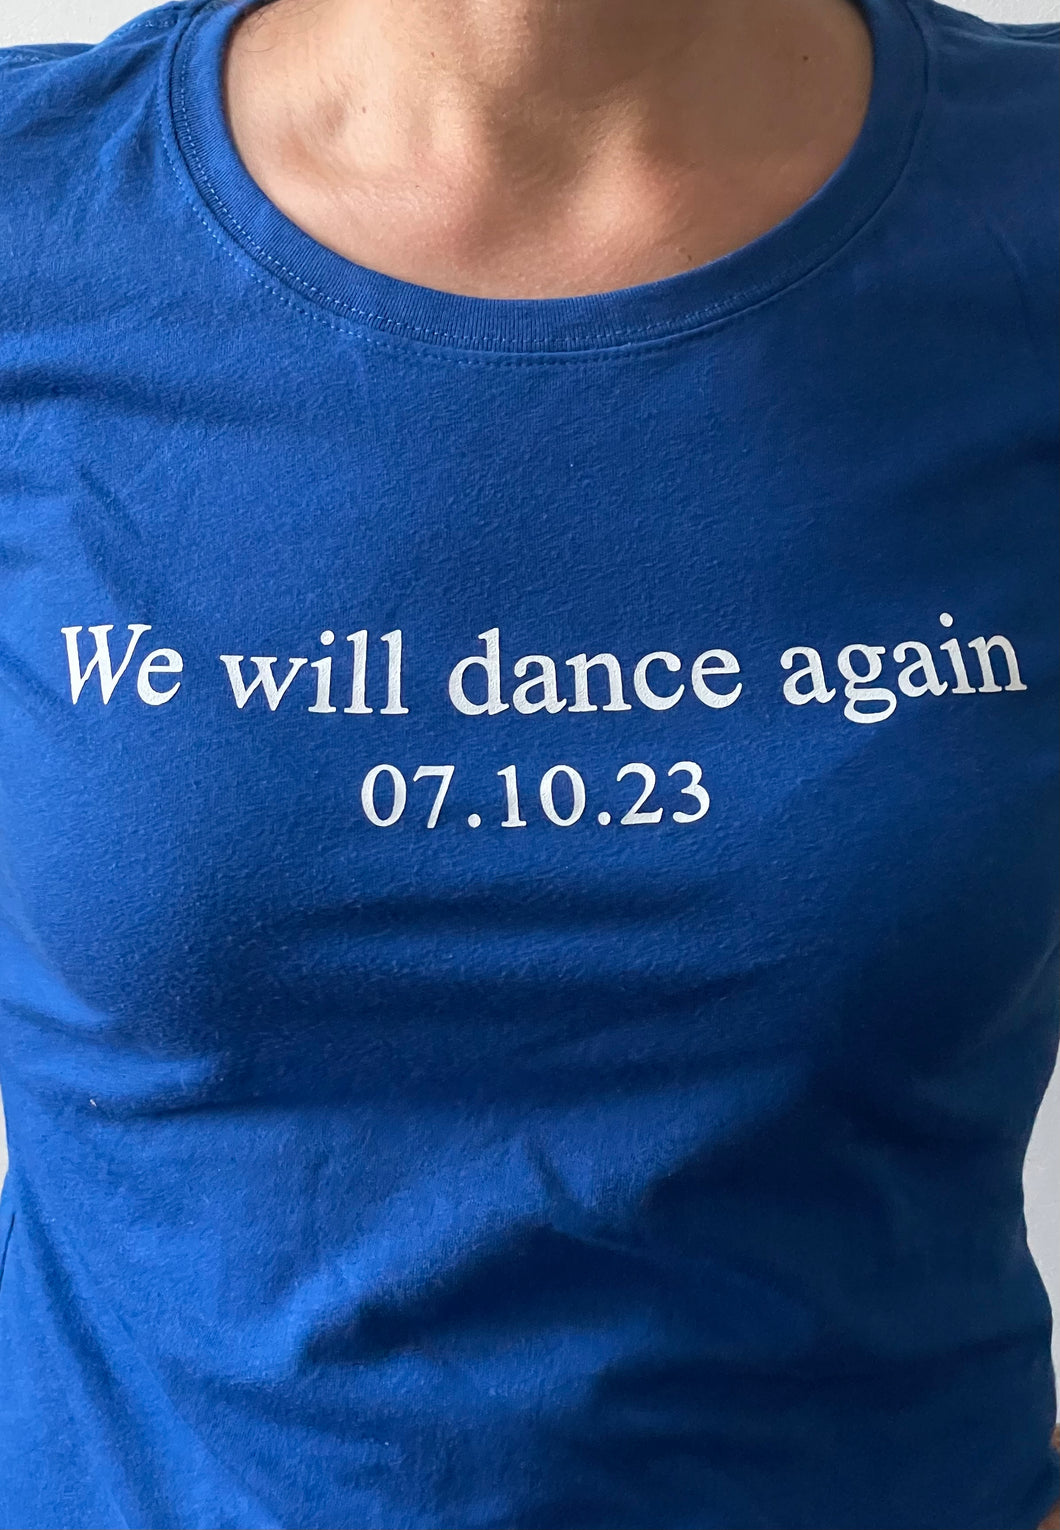 Next Level “We will dance again” Women’s T-shirt in Royal Blue